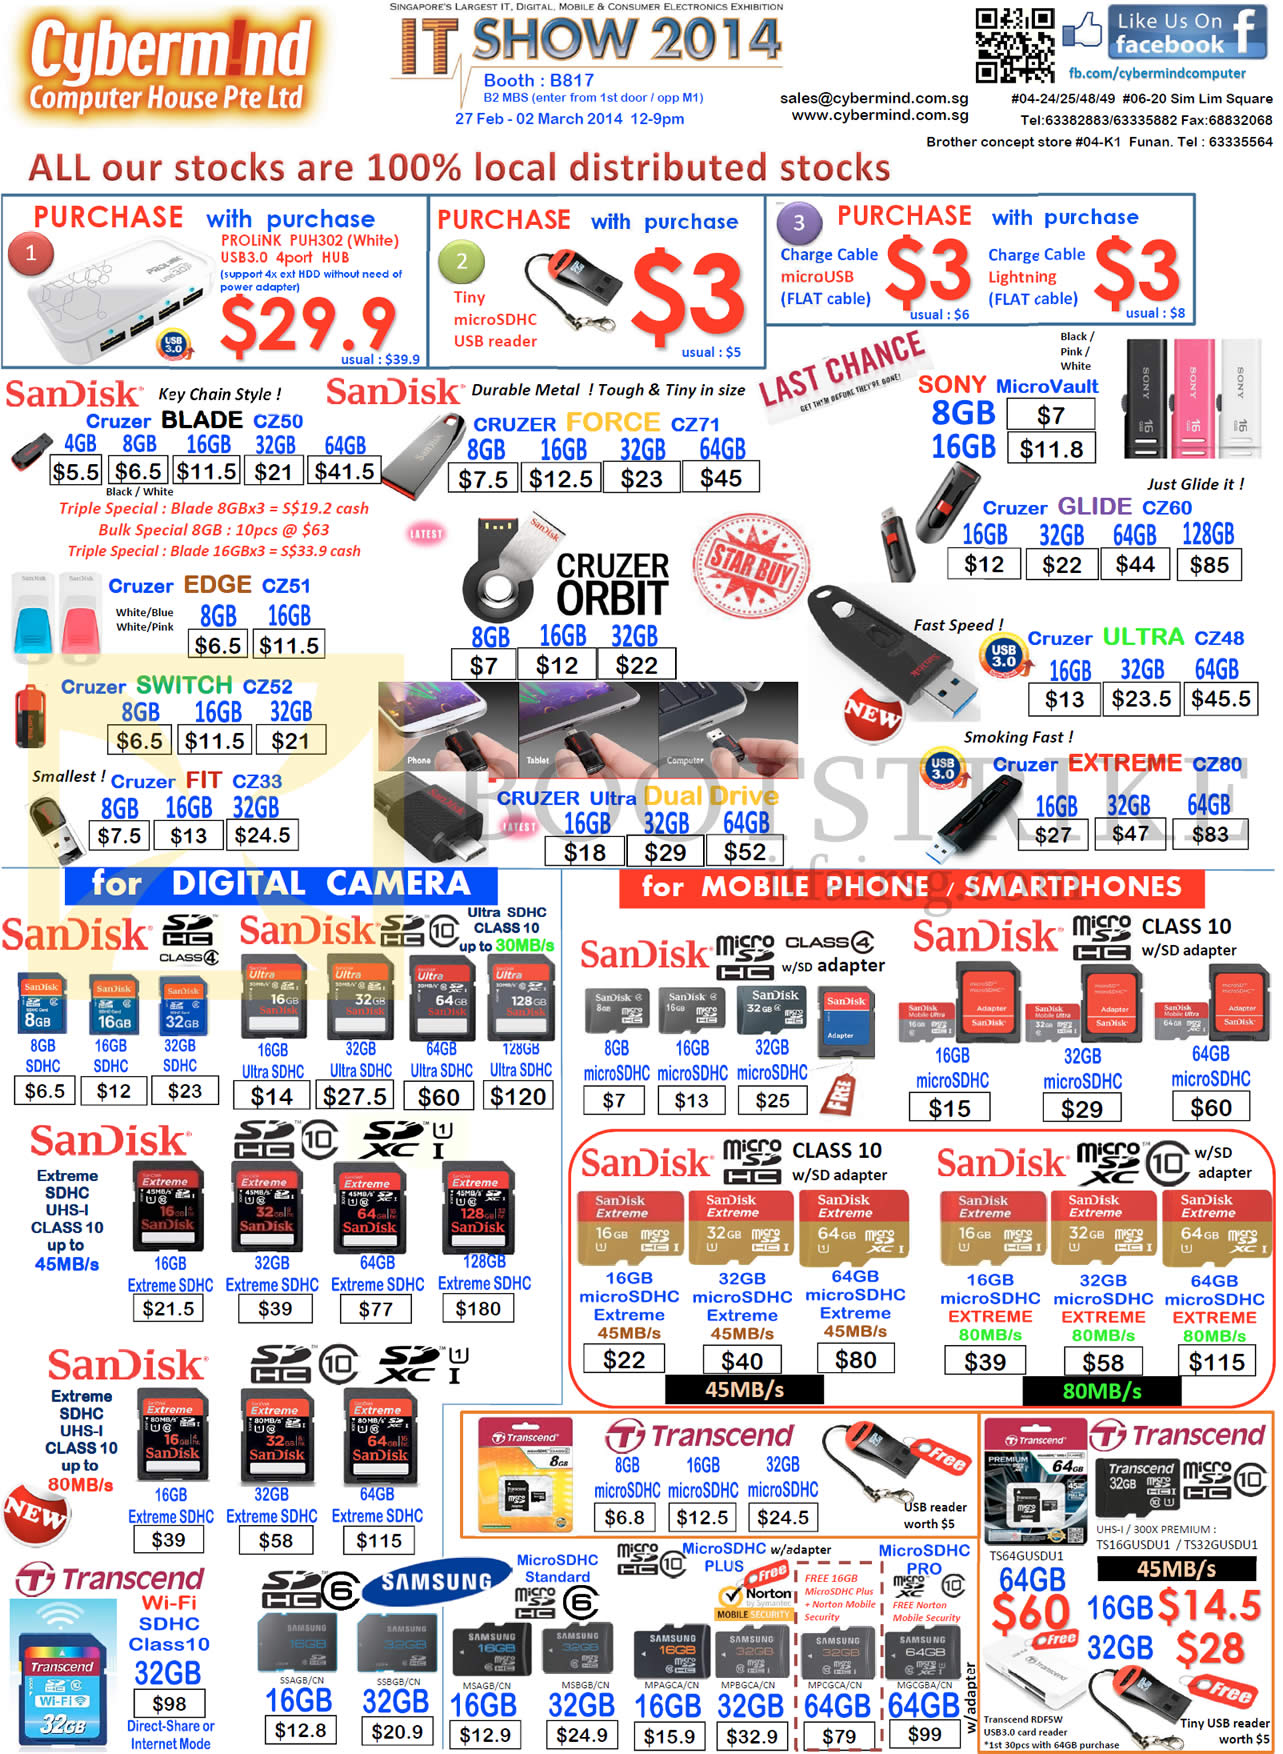 IT SHOW 2014 price list image brochure of Cybermind USB Flash Drives, Memory Cards, Sandisk Blade Force Cruzer Orbit Switch Edge Fit Ultra Extreme Ultra Glide, Sony Micro Vault, Transcend, MicroSD SDHC